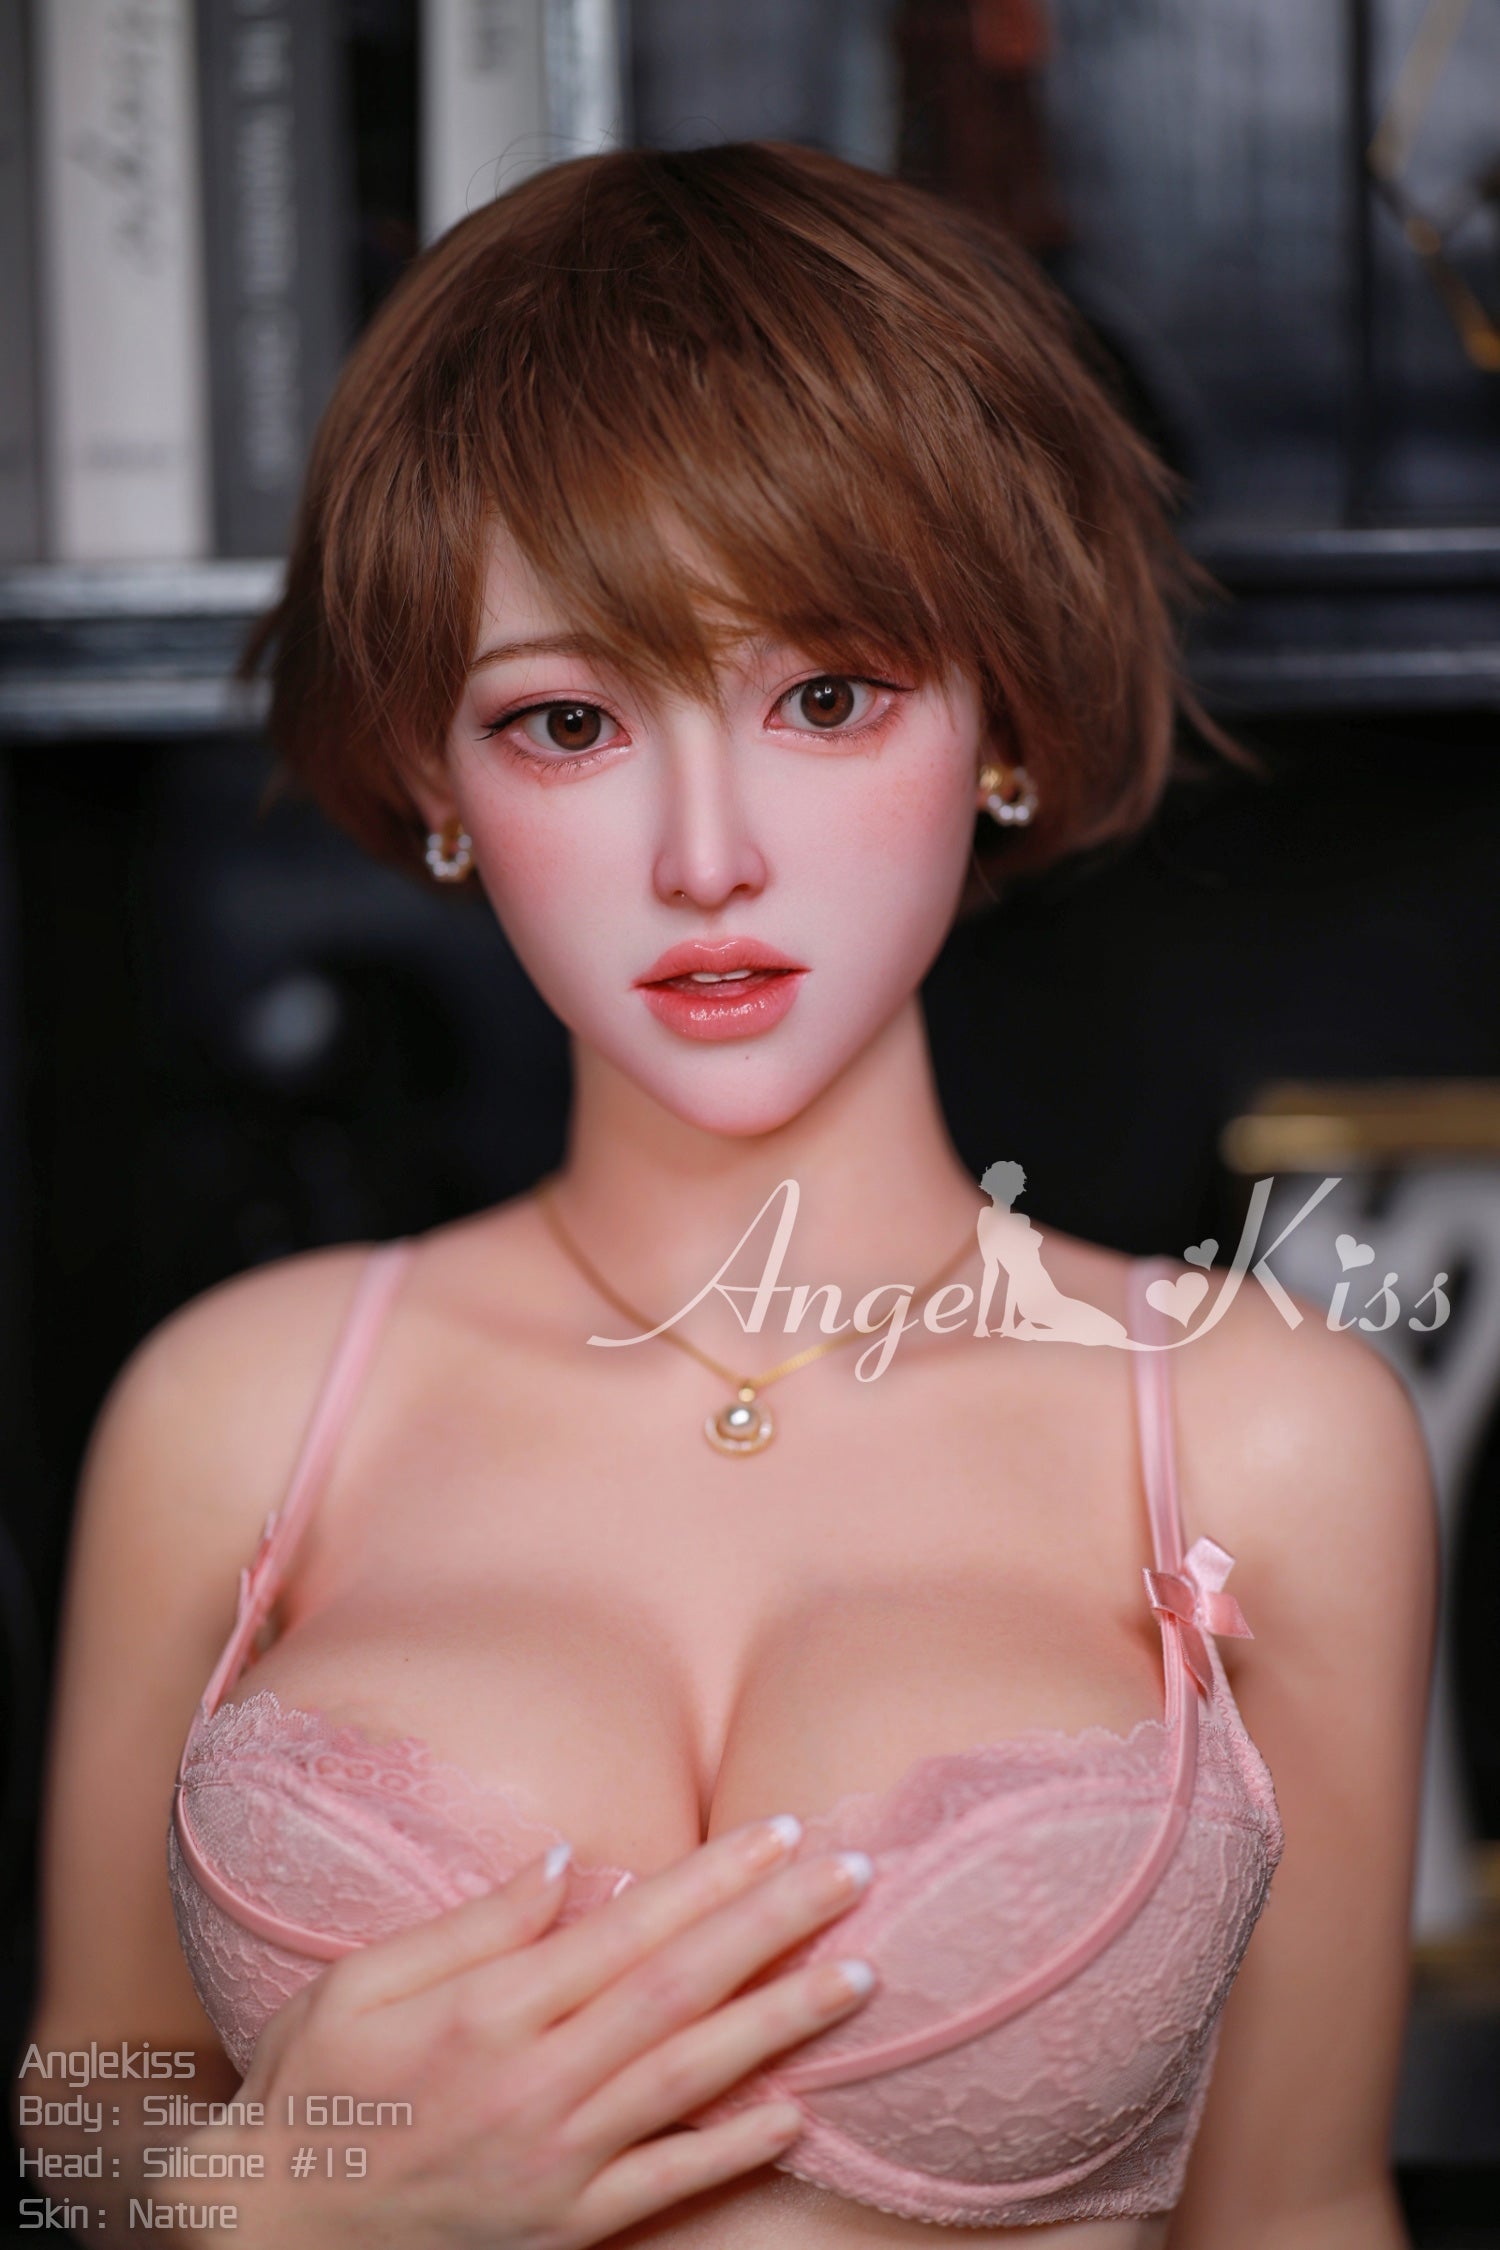 Angelkiss Doll 160 cm Silicone - Xiao | Buy Sex Dolls at DOLLS ACTUALLY